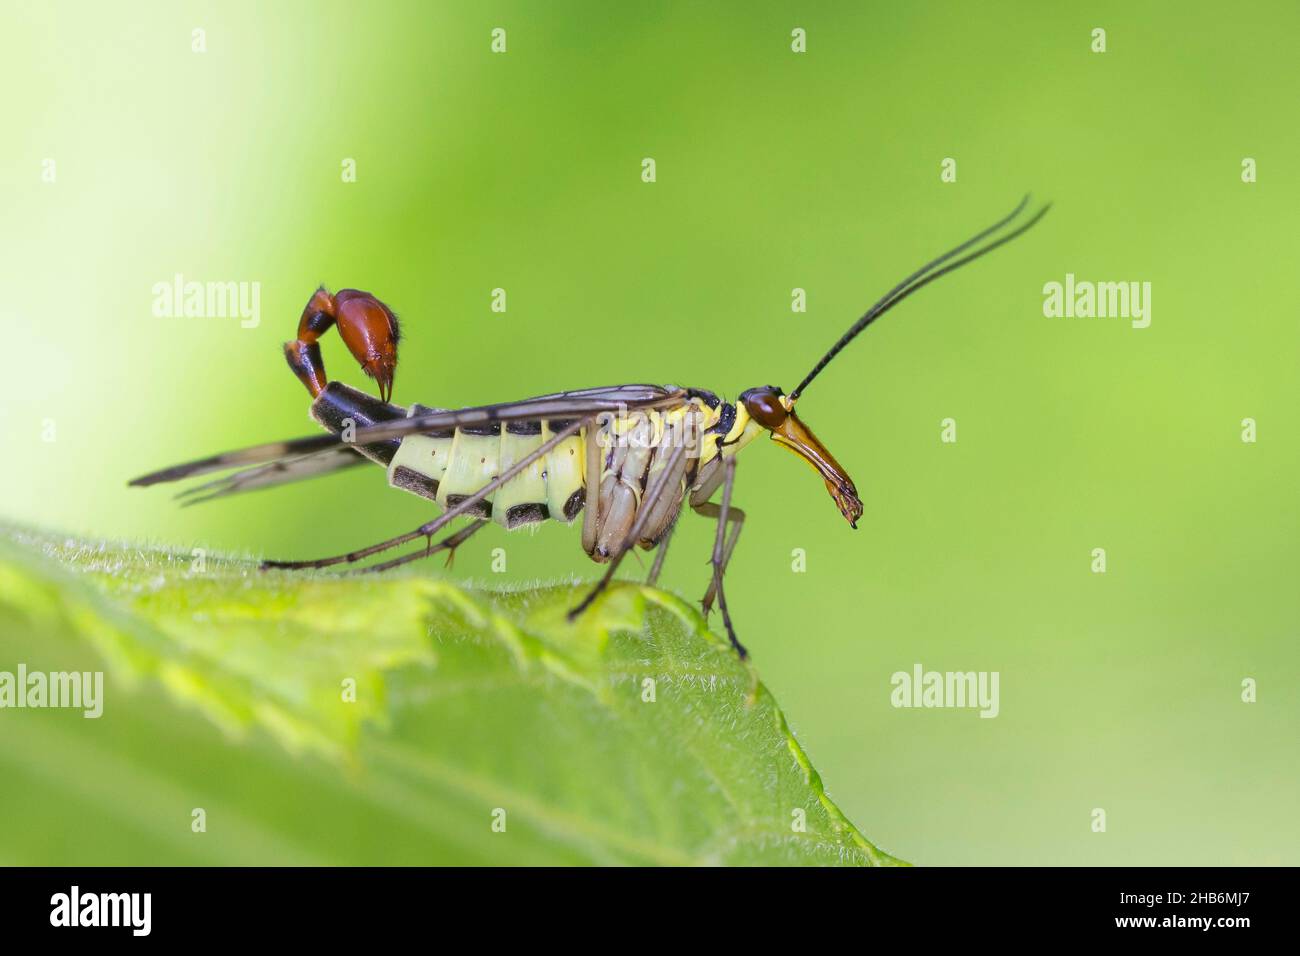 common scorpionfly (Panorpa cf. communis), Male with scorpion-like tail, Germany Stock Photo